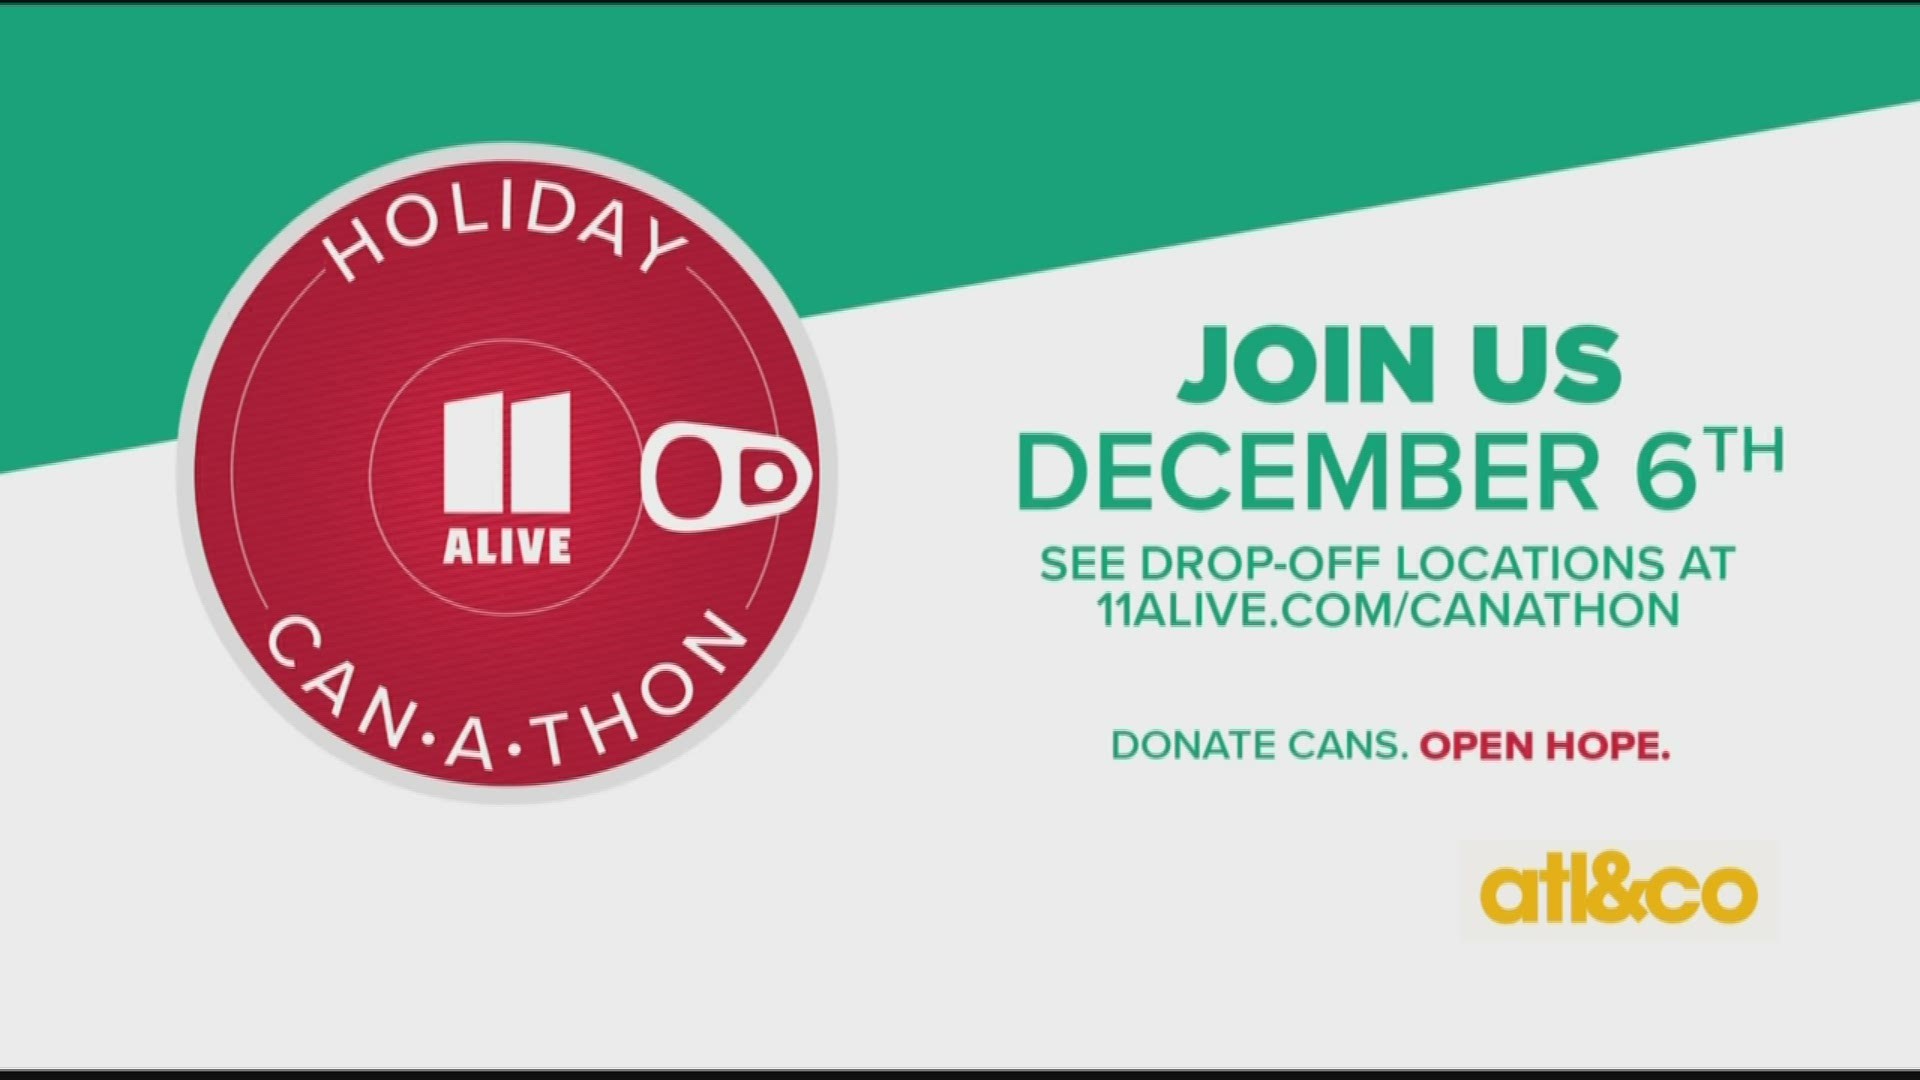 Preview the 37th Annual Can-A-Thon with Salvation Army Atlanta on Community Connection, brought to you by Woodstock Furniture and Mattress Outlet.